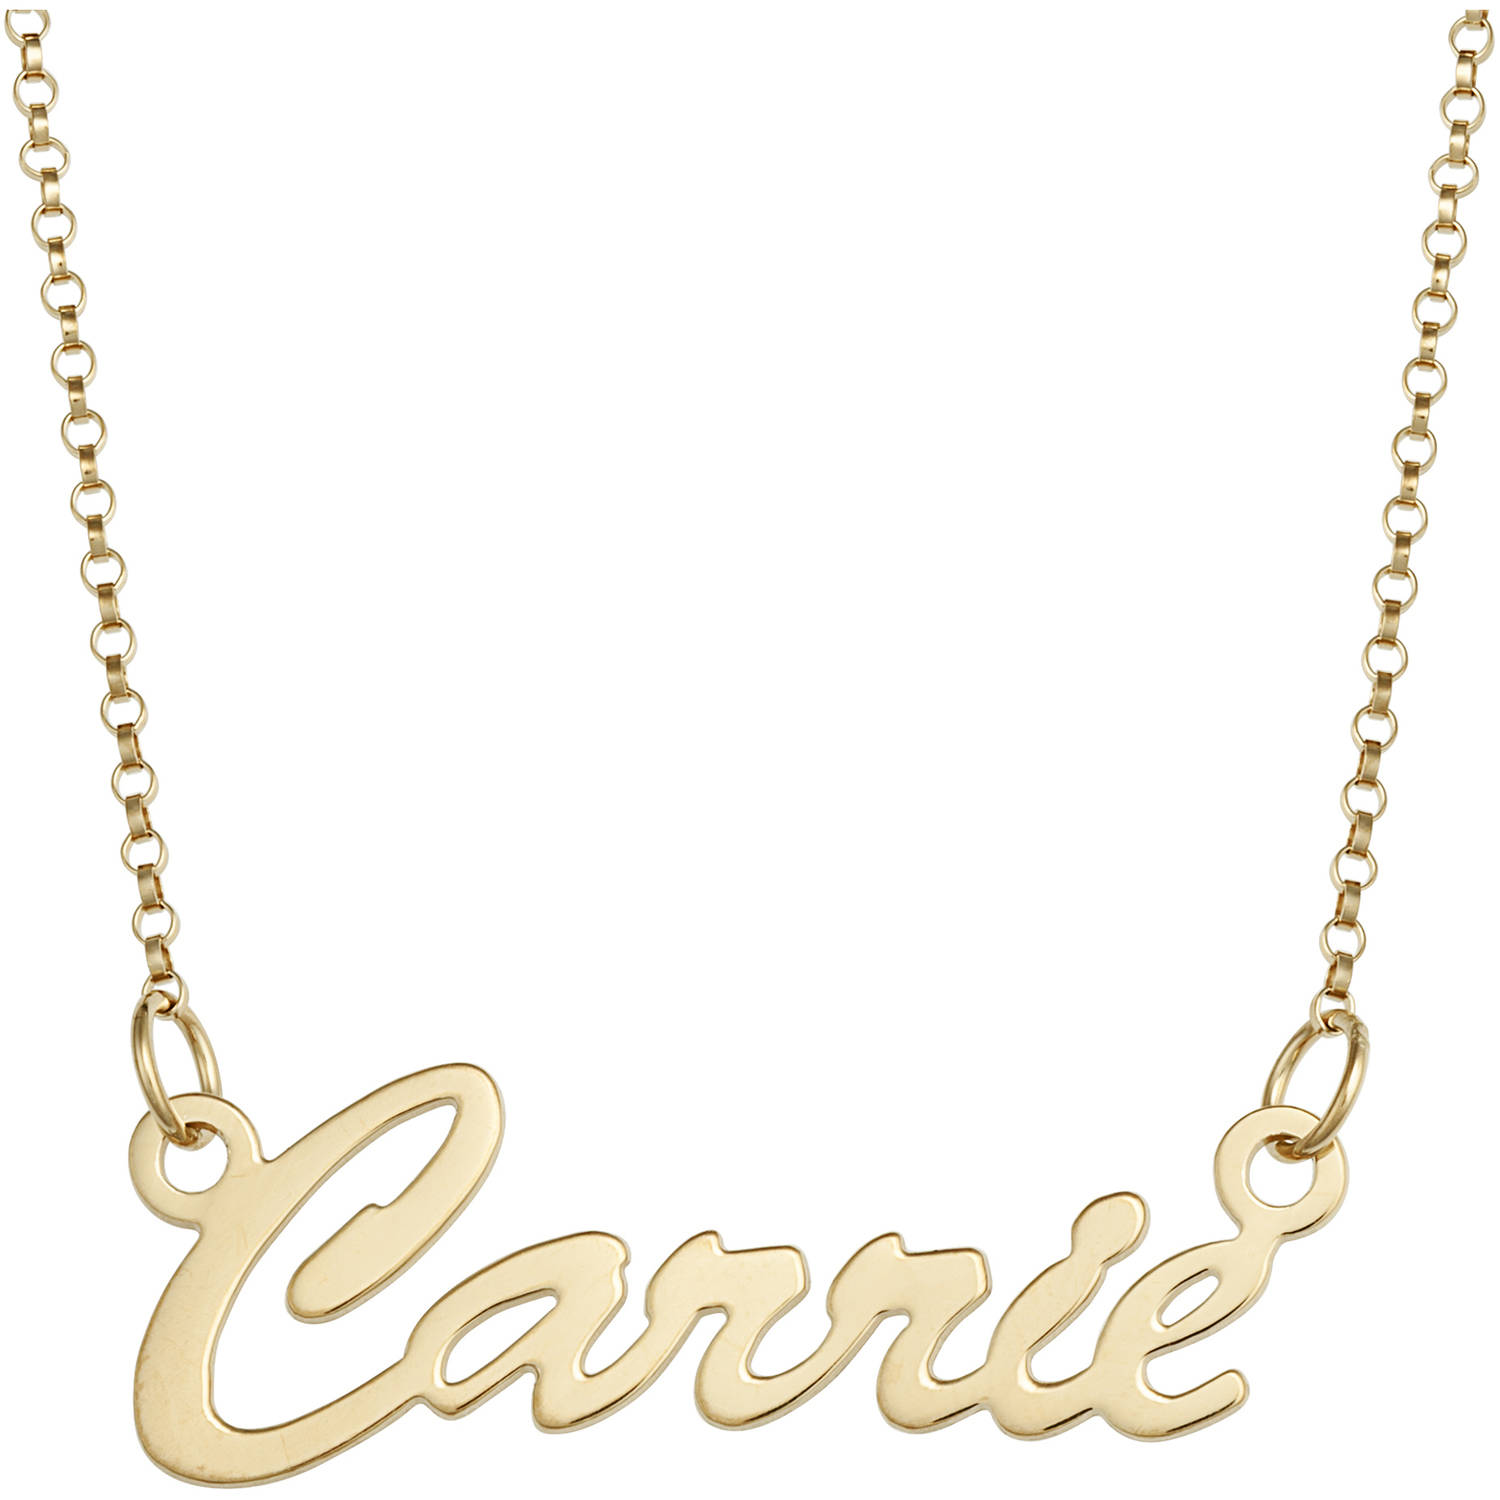 Personalized Planet Women's 14kt Gold-Plated Sterling Hollywood Nameplate Necklace,18" - image 1 of 5